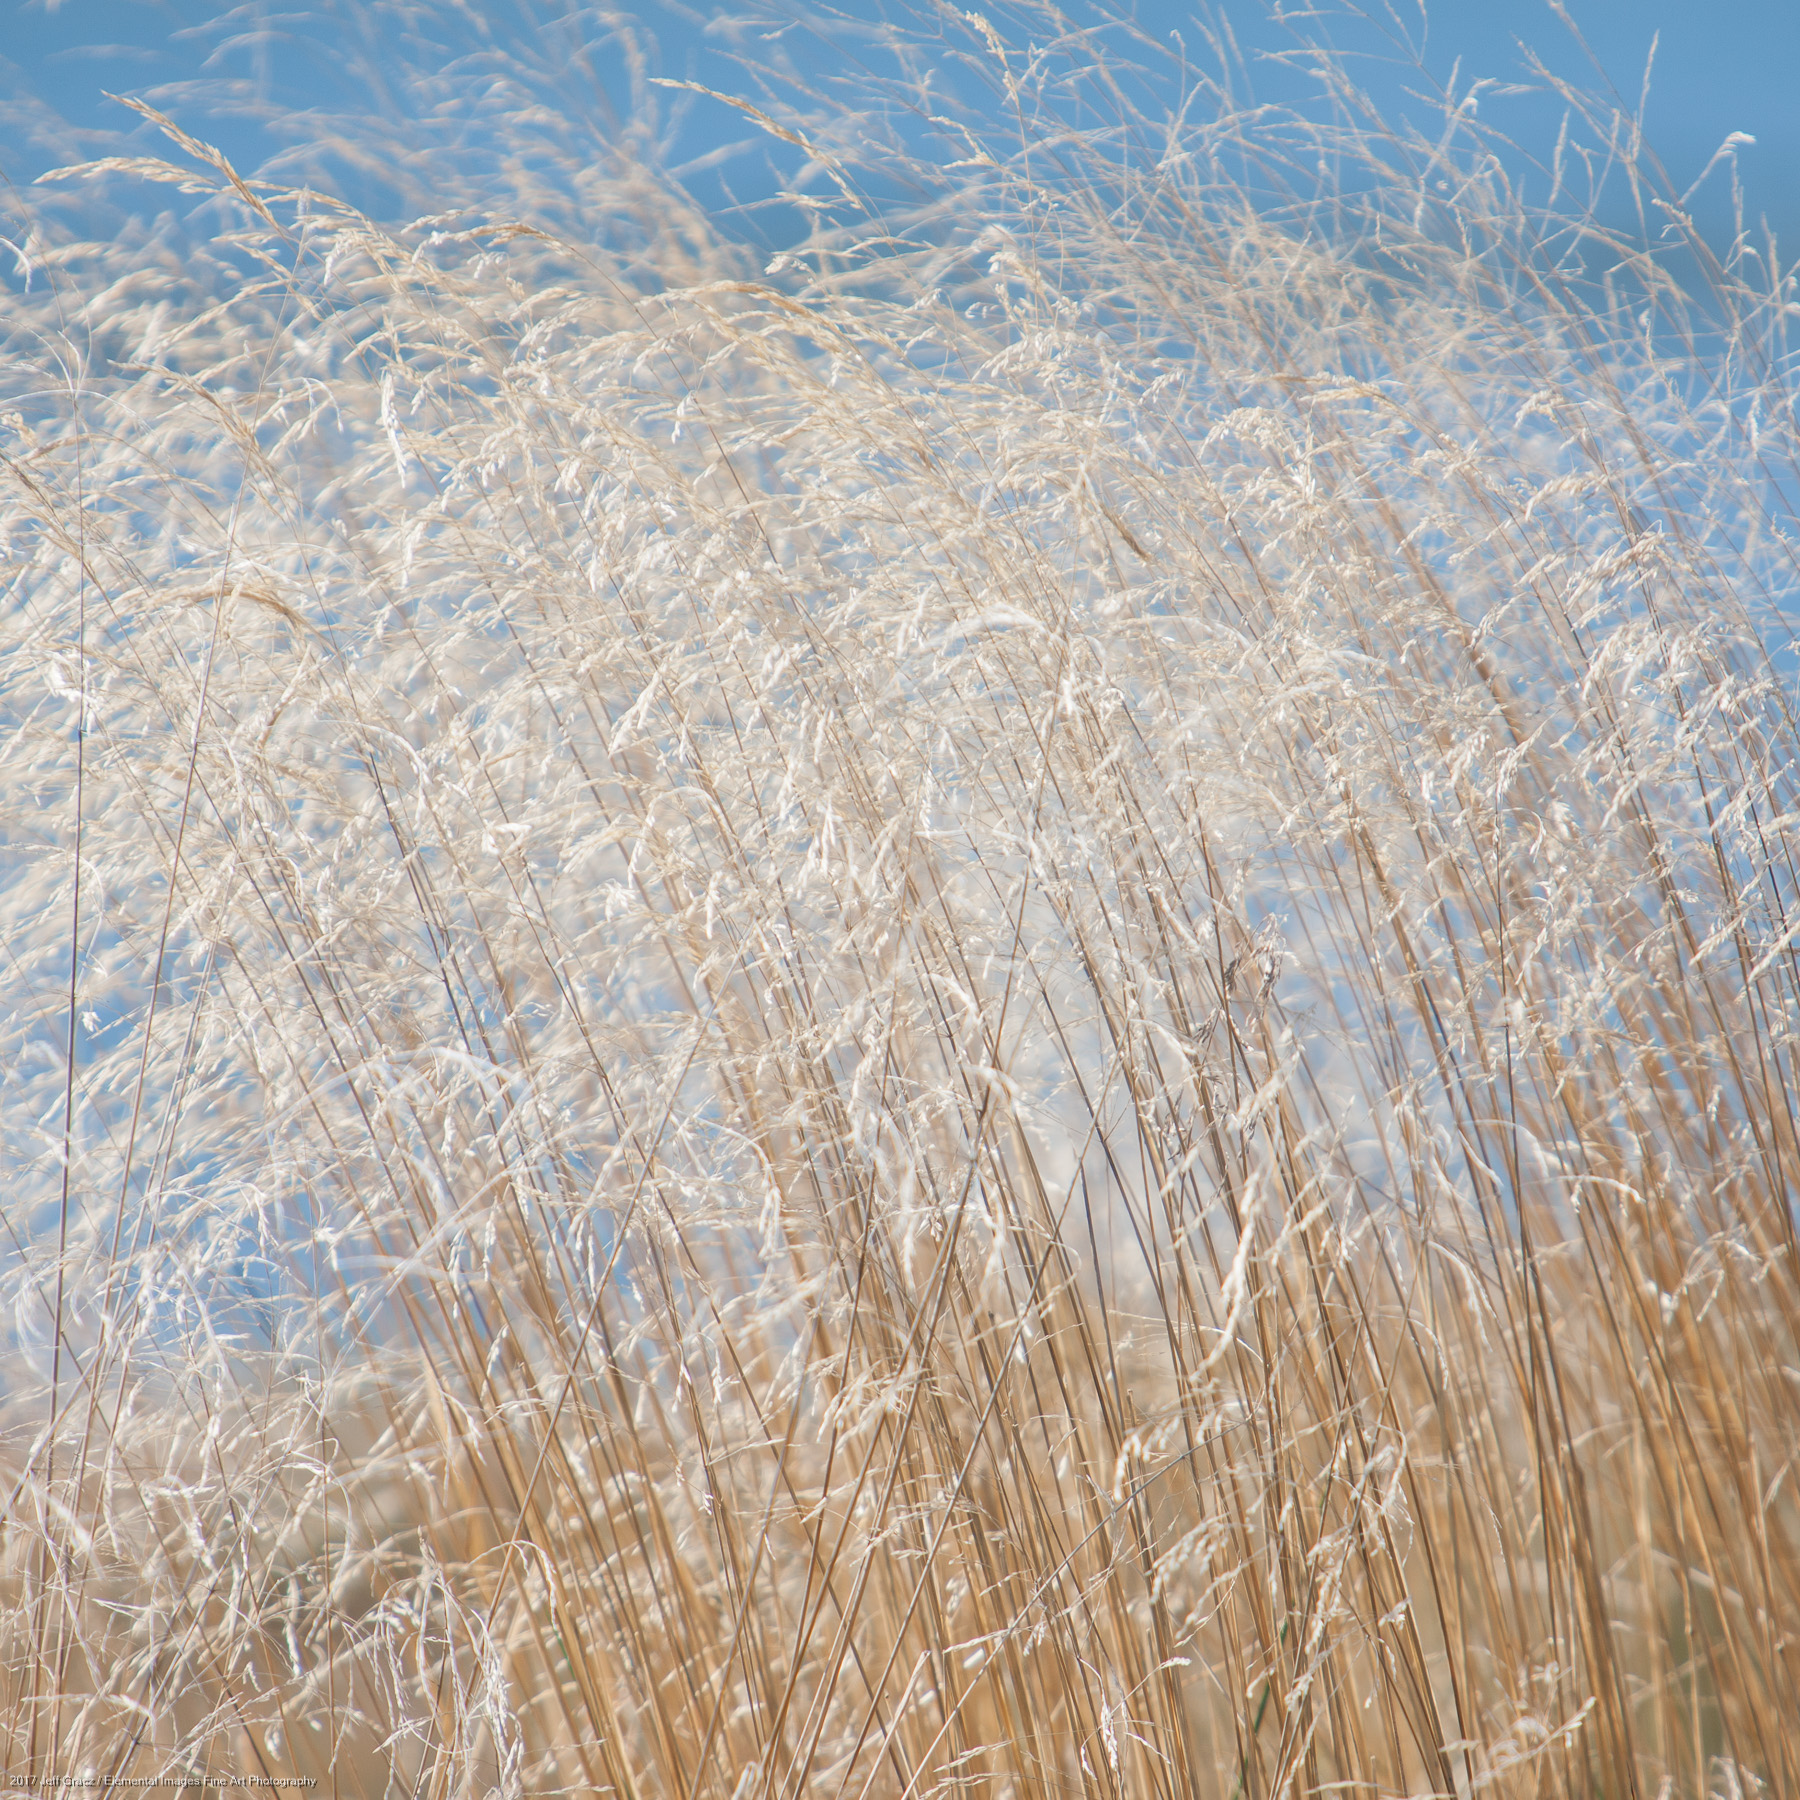 Grasses #162 | Three Rocks | OR | USA - © 2017 Jeff Gracz / Elemental Images Fine Art Photography - All Rights Reserved Worldwide